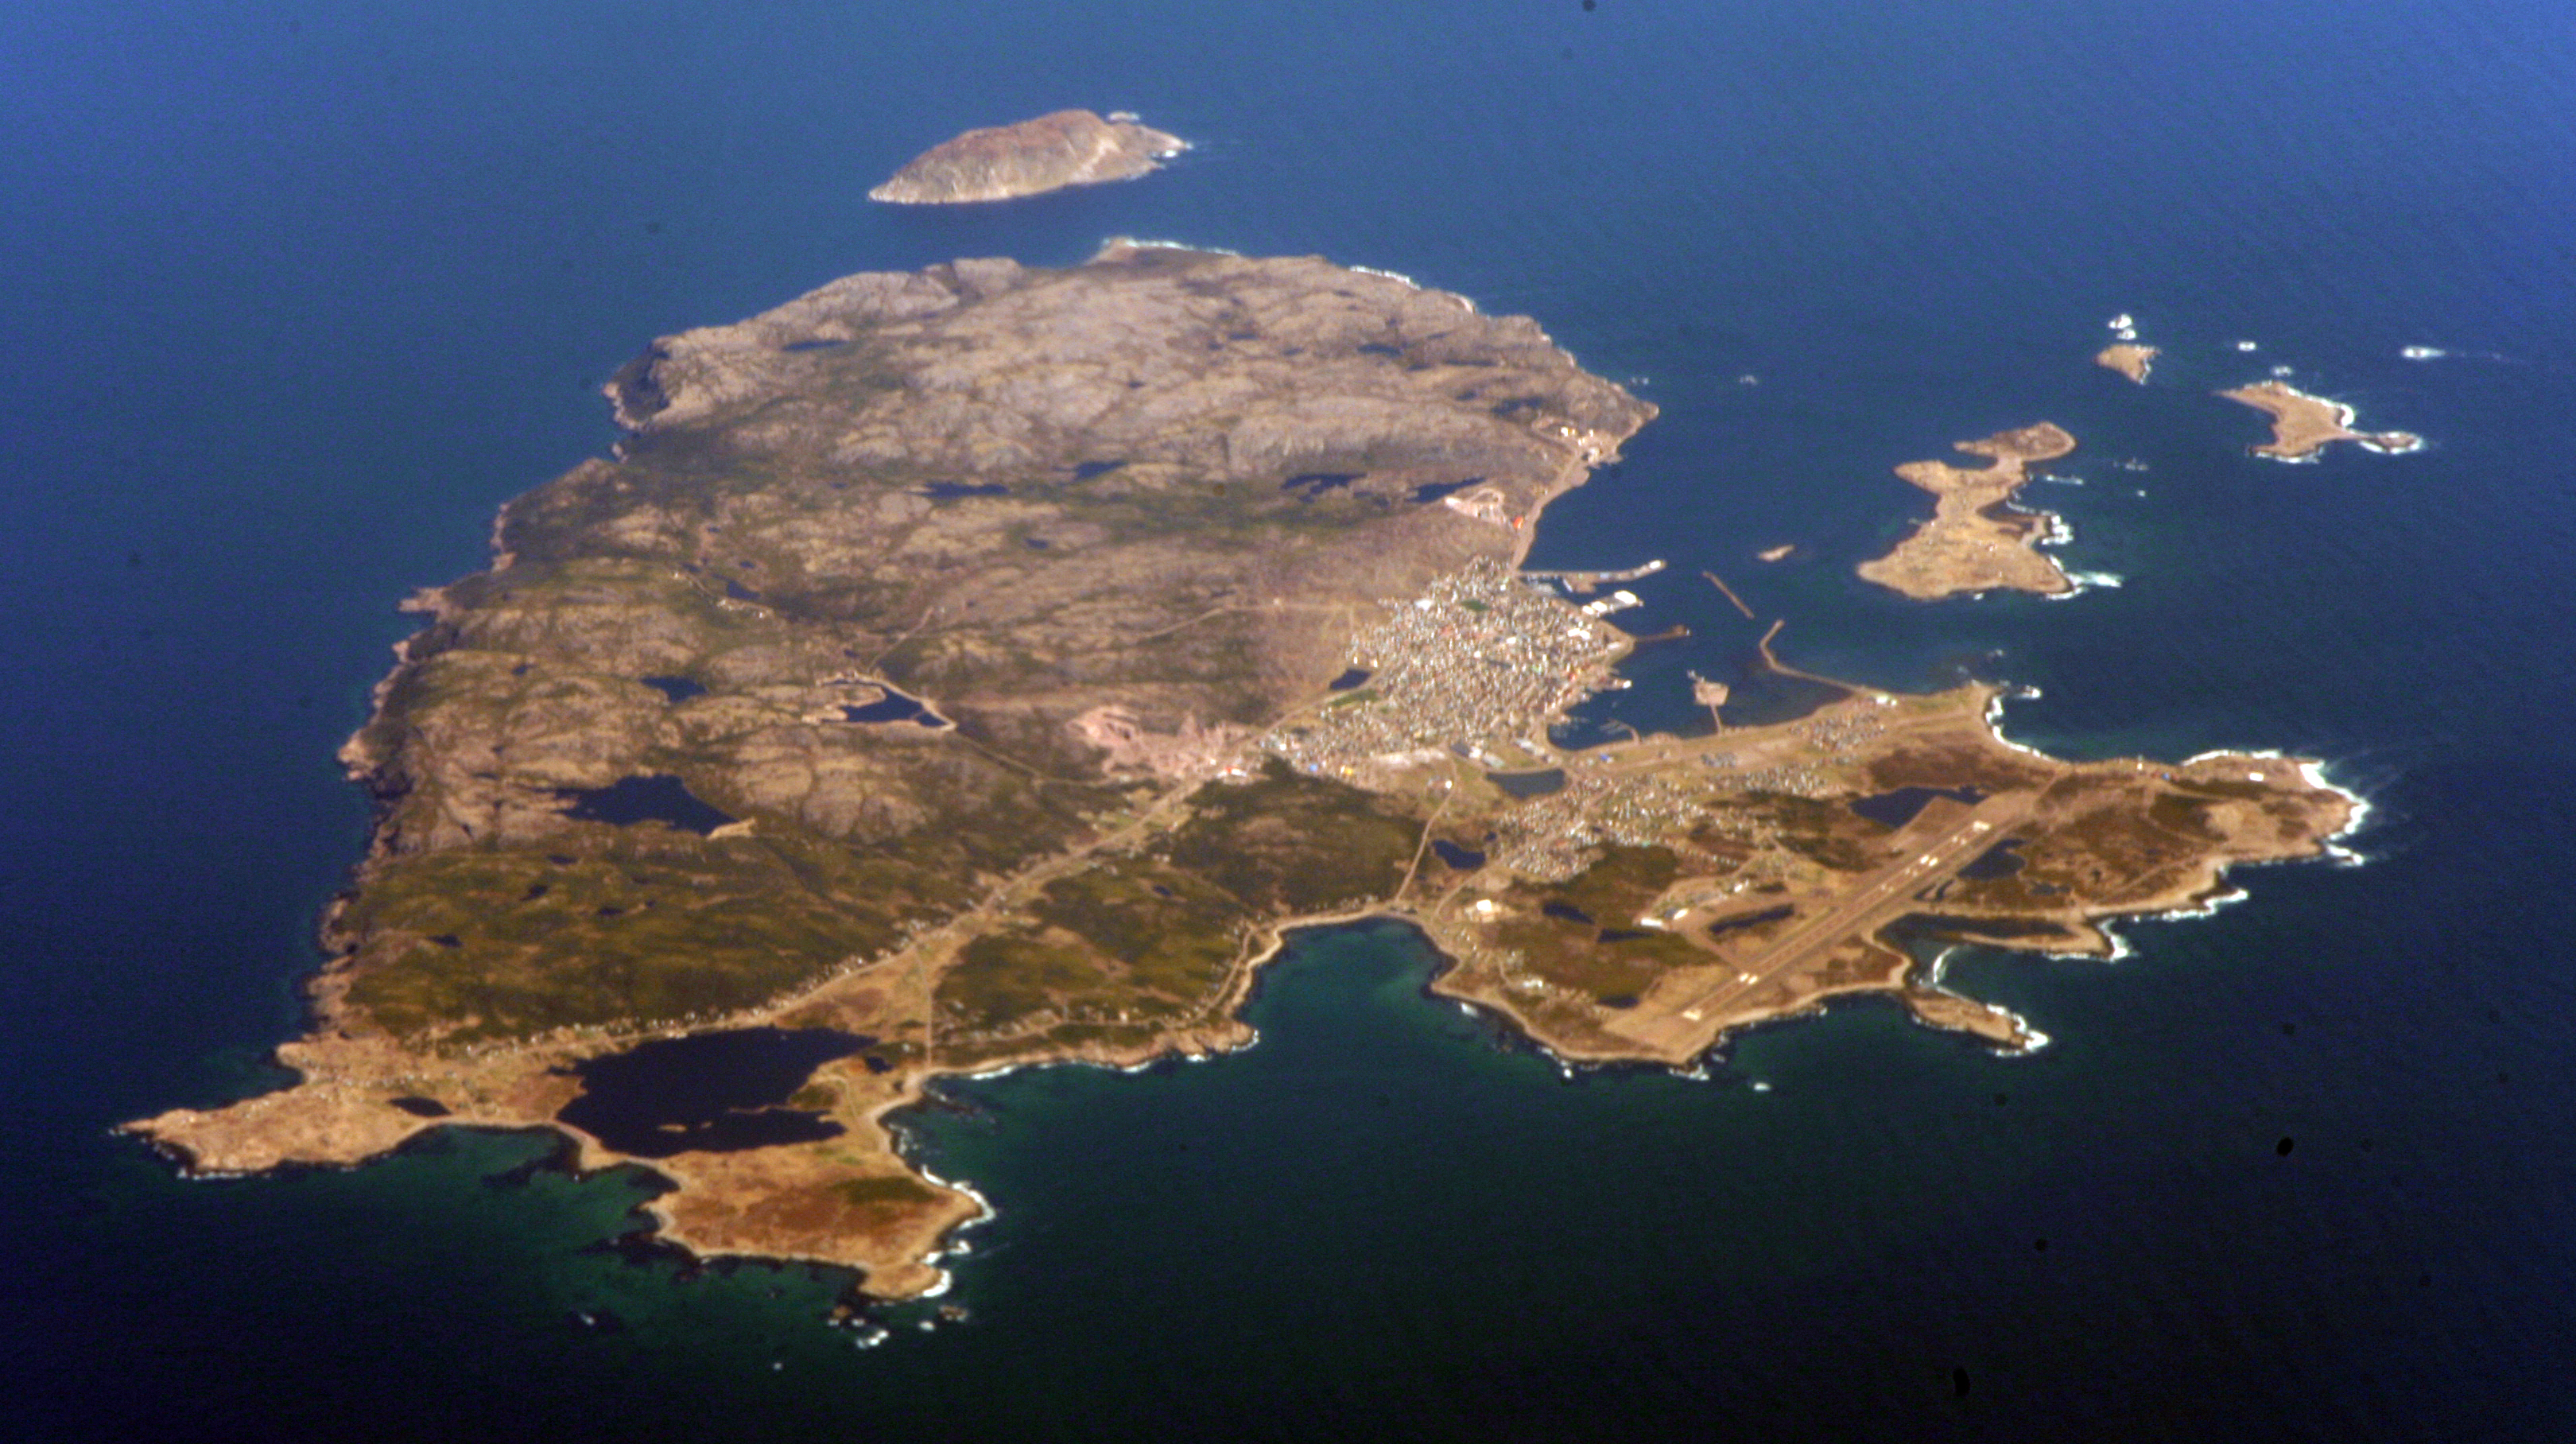 Saint Pierre and Miquelon is a French archipelago south of the Canadian island of Newfoundland.